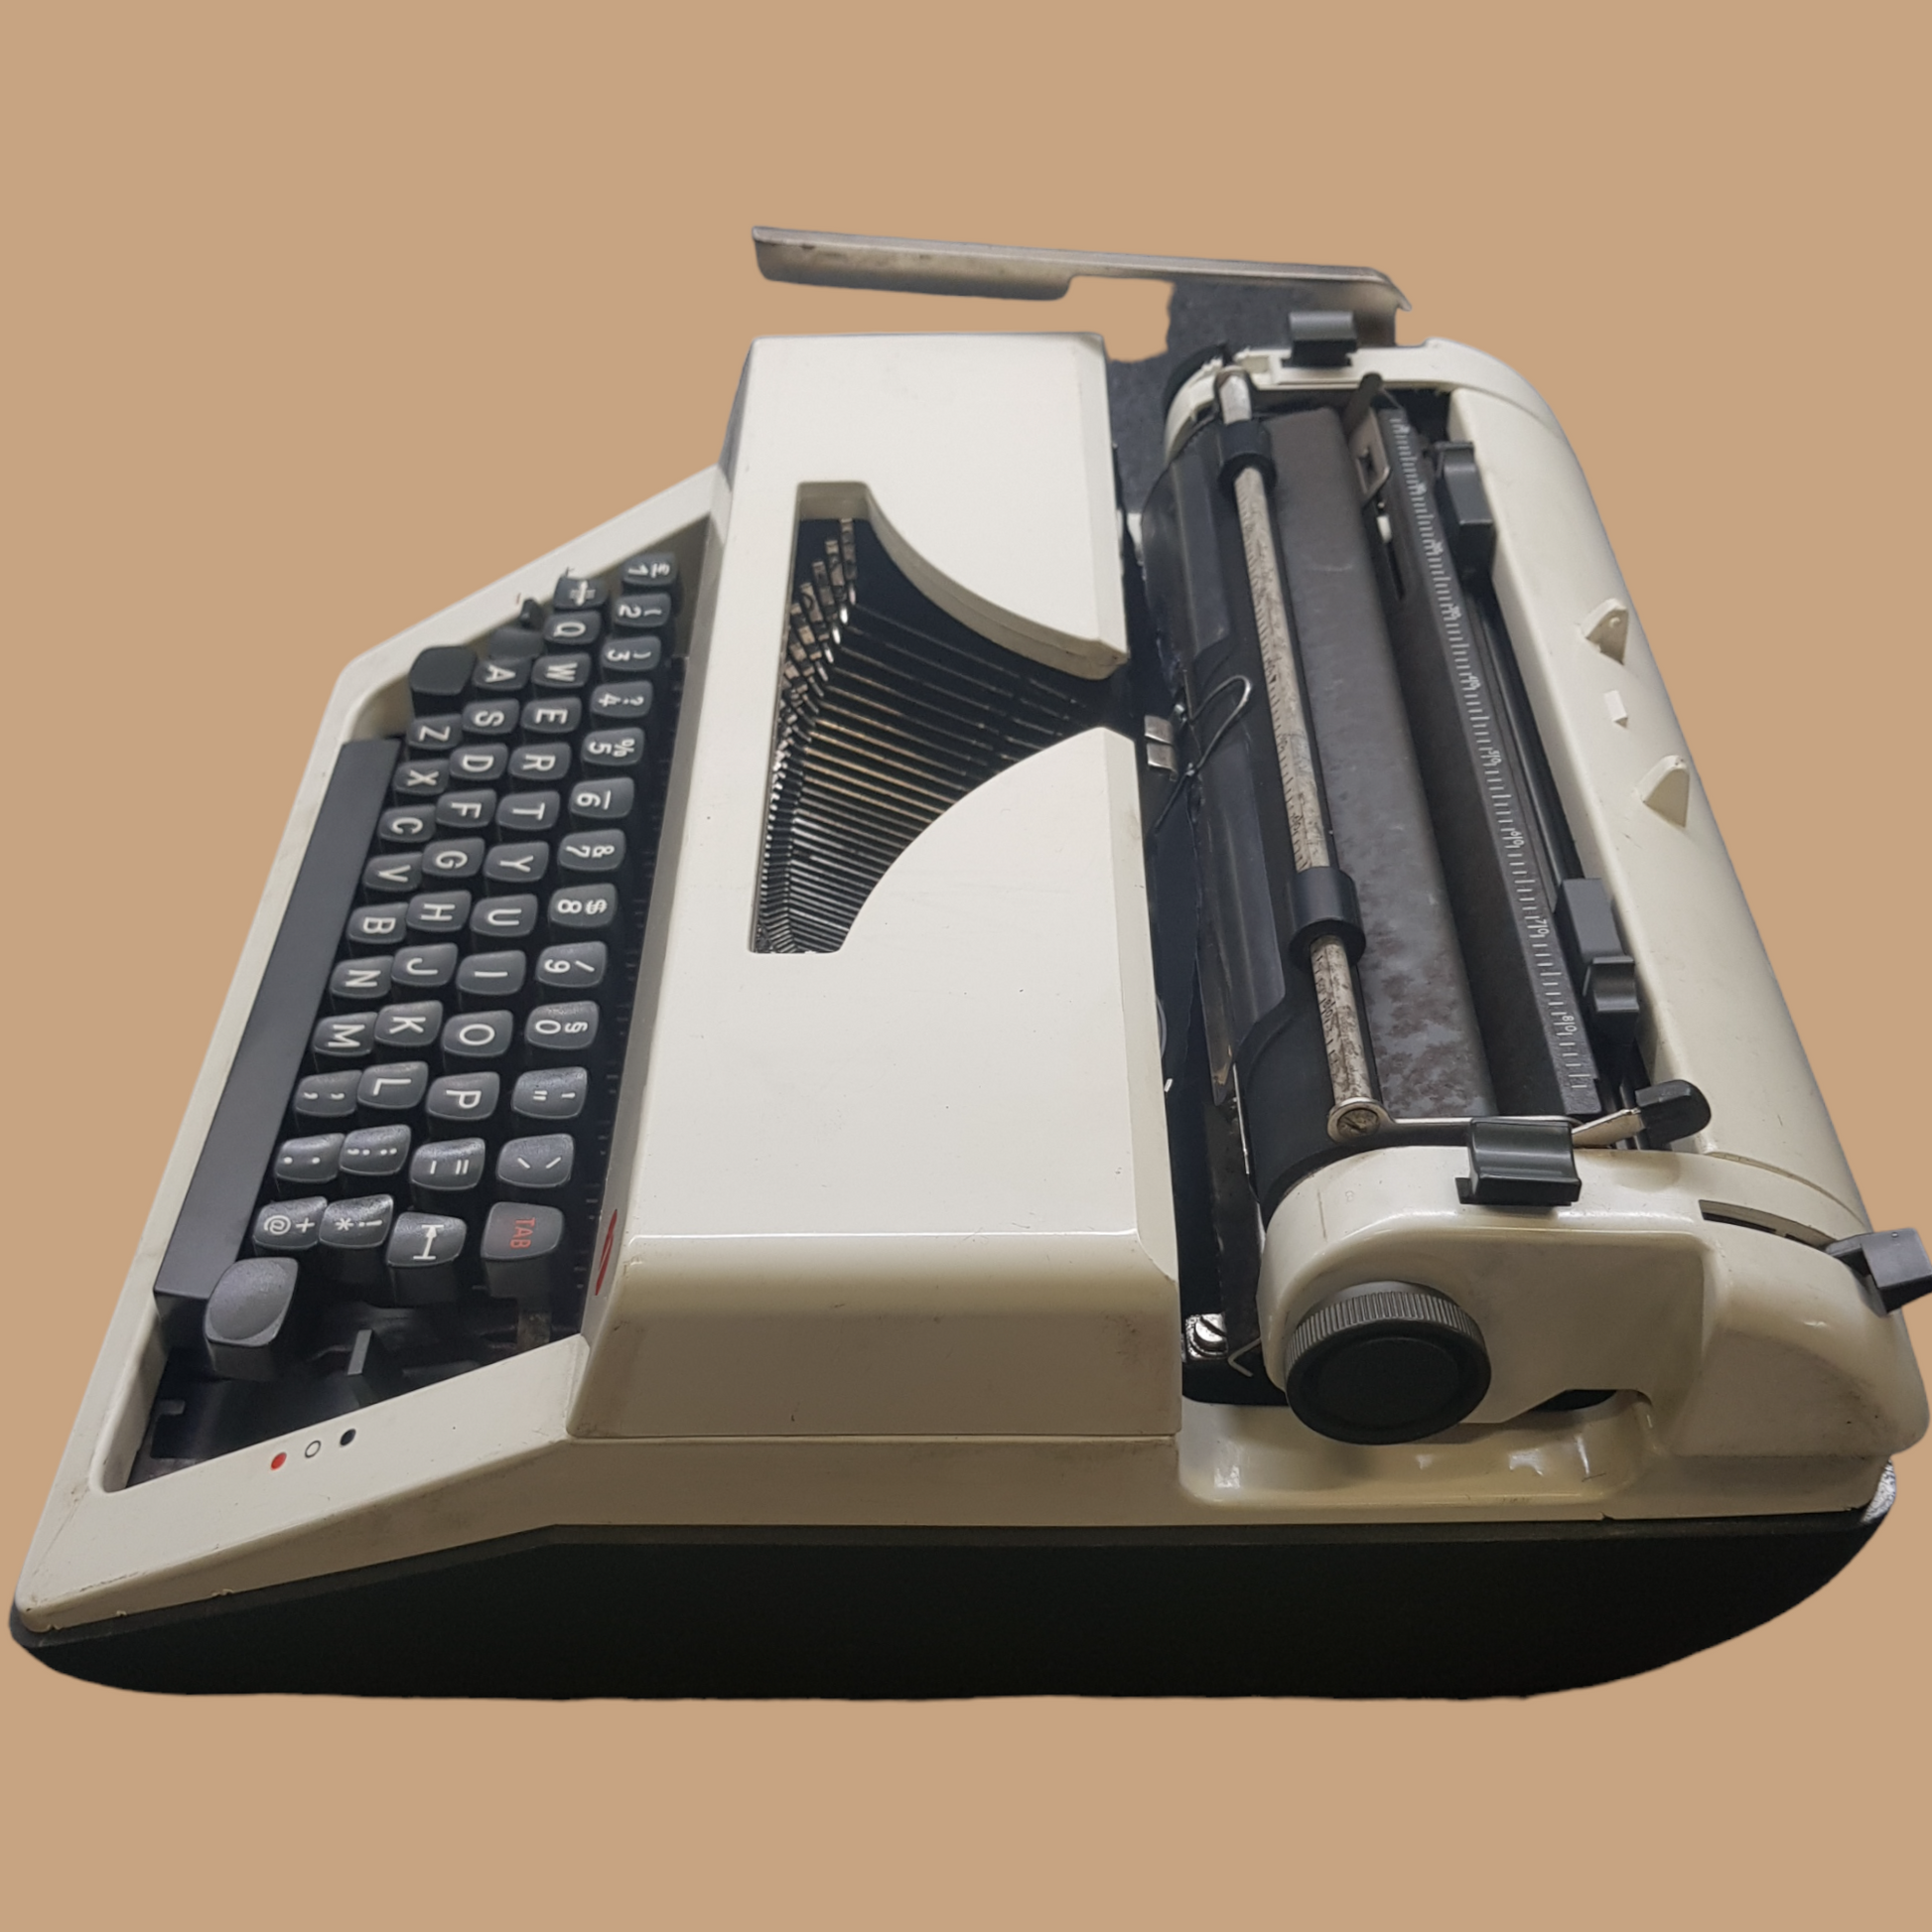 Image of Olympia Monica DLX Typewriter. A Midsize Portable Typewriter. Made in Germany. Fibre Body. Available from universaltypewritercompany.in.